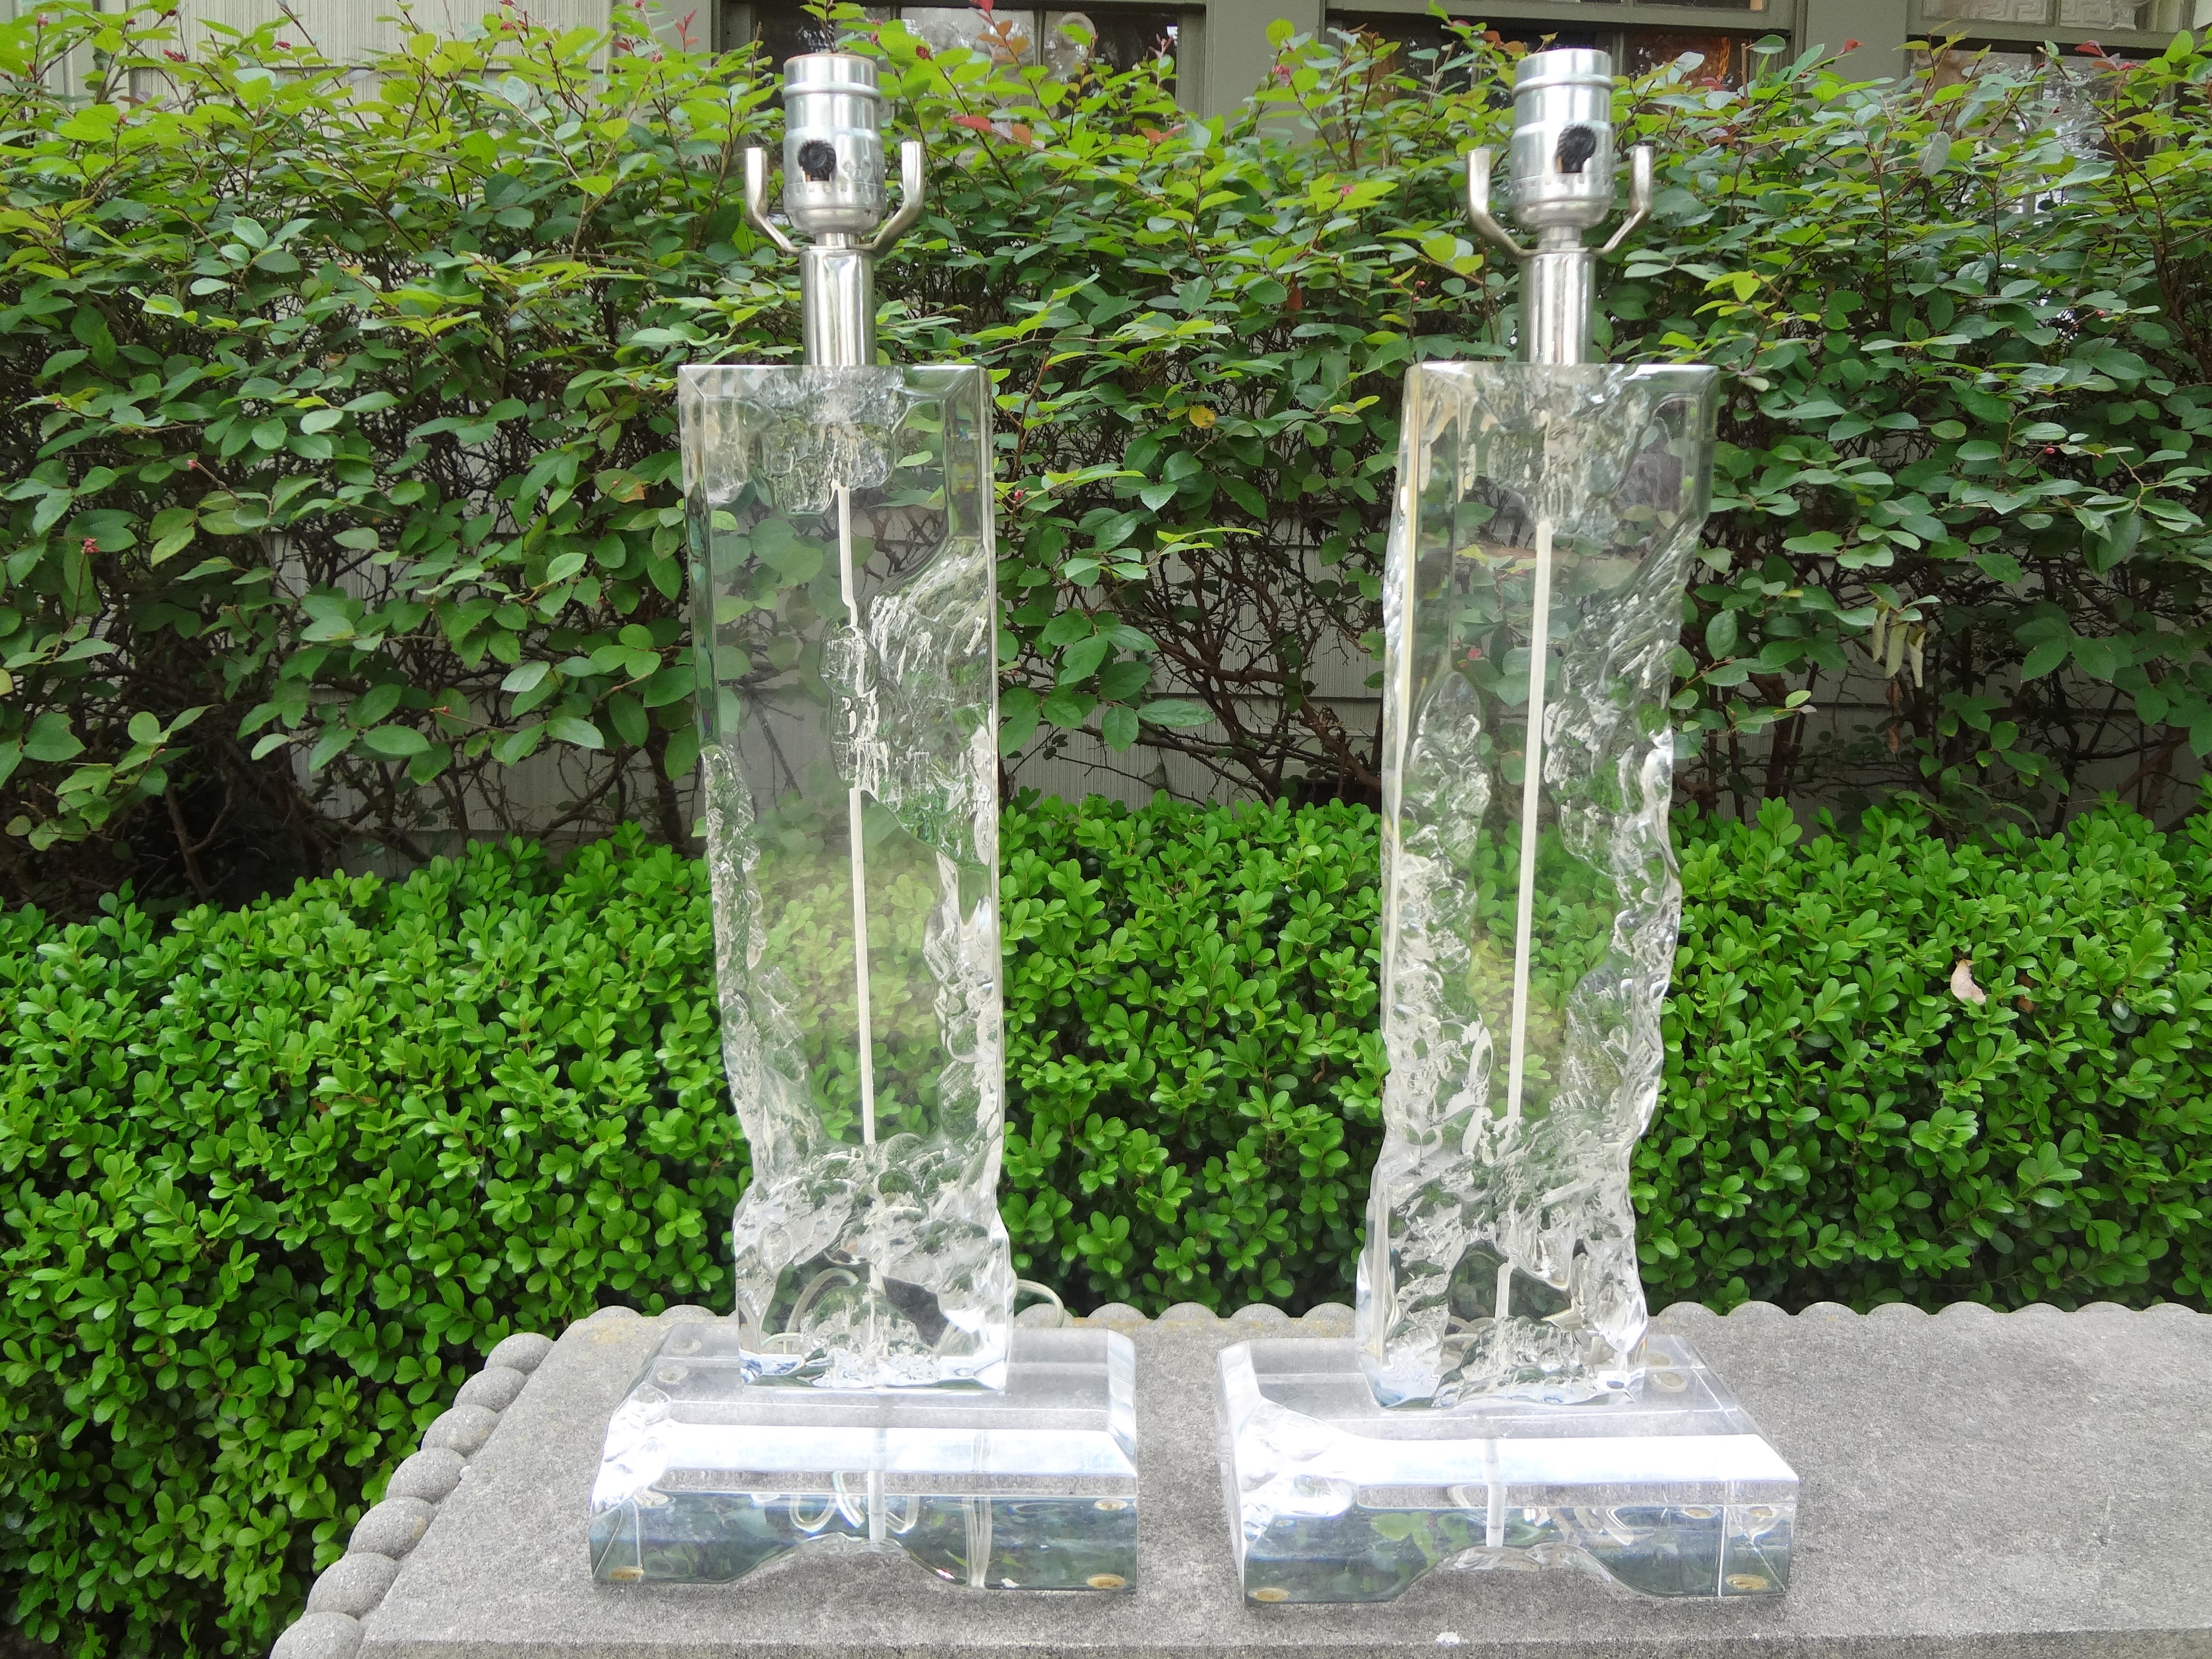 Pair of Mid-Century Acrylic Lamps in the Manner of Les Prismatiques.
Unusually stunning pair of Mid-Century Modern acrylic lamps or lucite lamps in the style of Les Prismatiques, Karl Springer or Van Teal. These great Mid-Century Modern lamps have